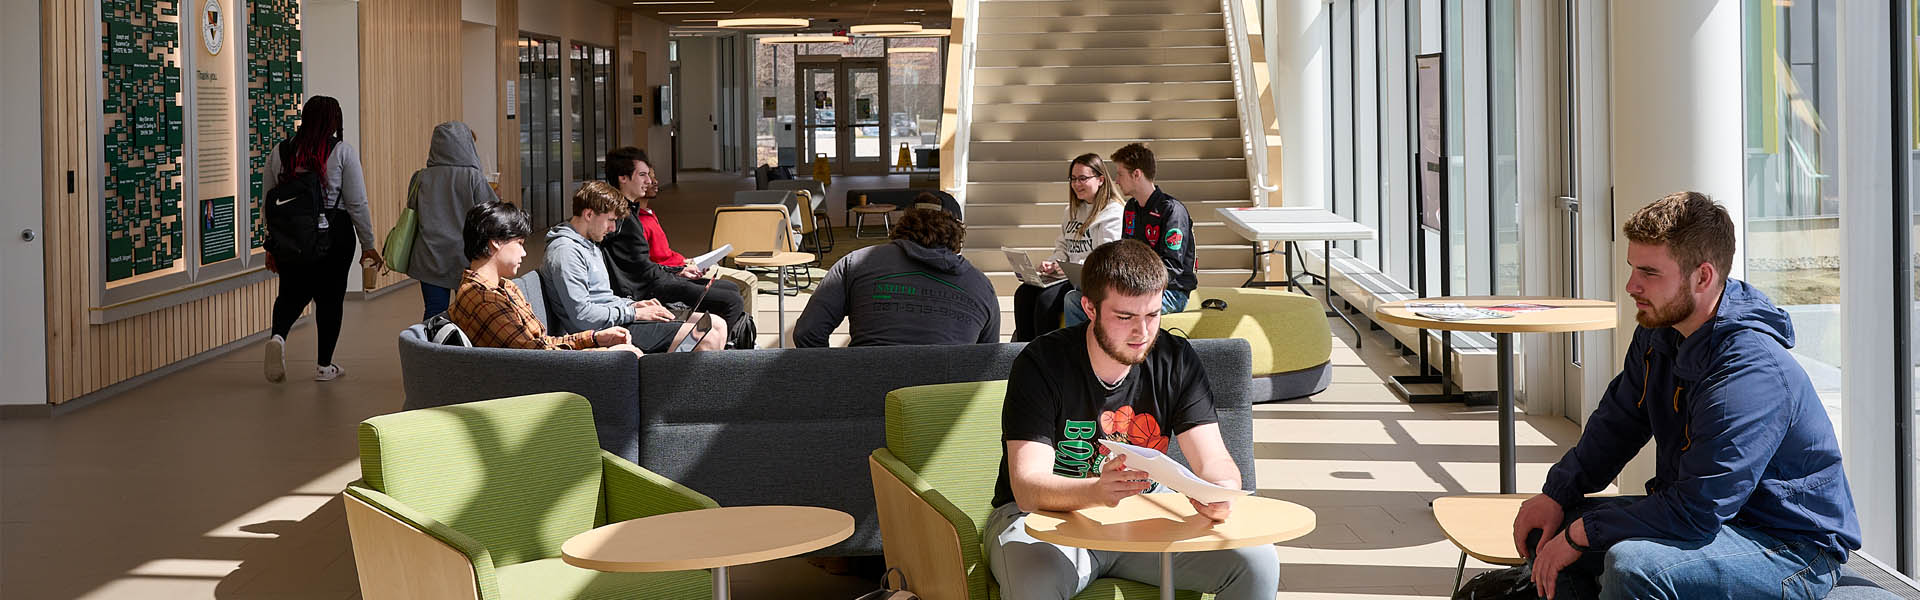 Interior view of Harold Alfond Hall where students are seated, talking and studying